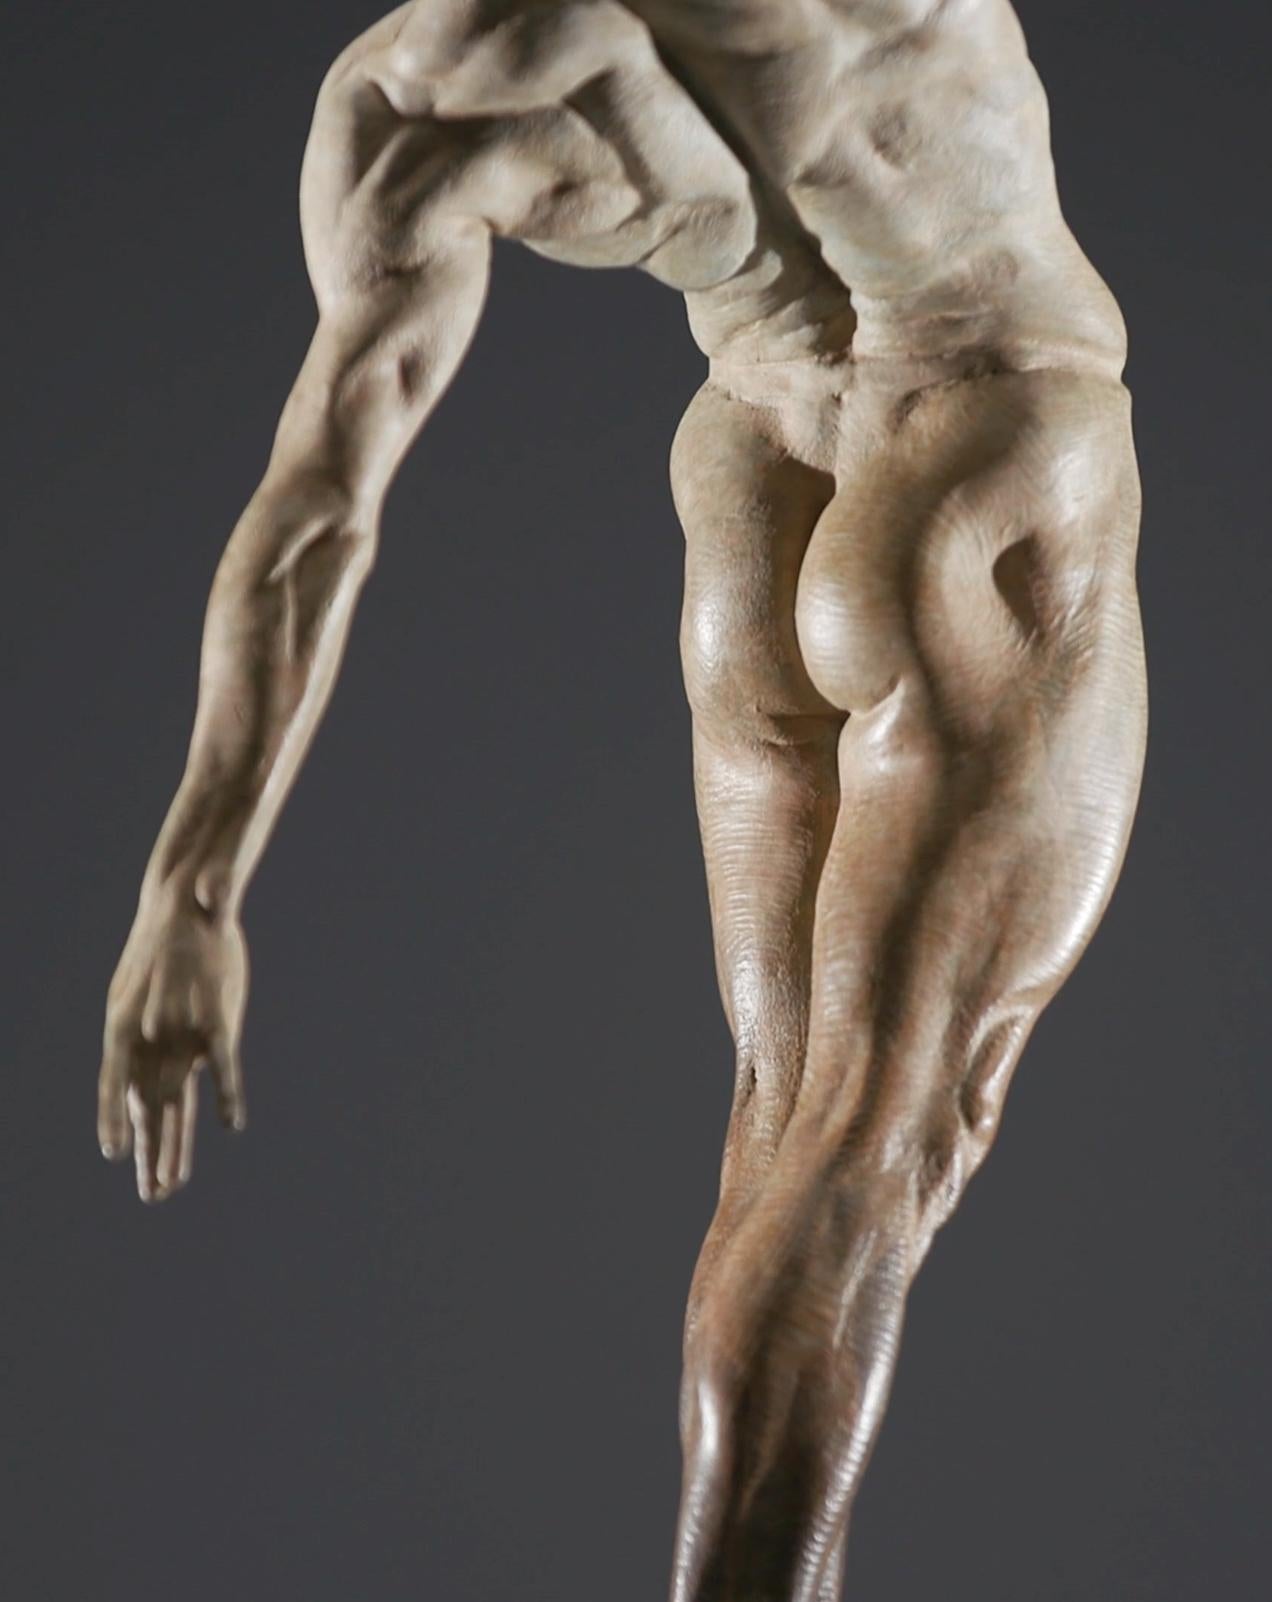 	
In his work entitled Allongé – to elongate or stretch - Richard MacDonald has sculpted the powerful lines of the male and female dancers, accentuating the graceful, yet powerful forms of their bodies. From the front view we see the synchronization